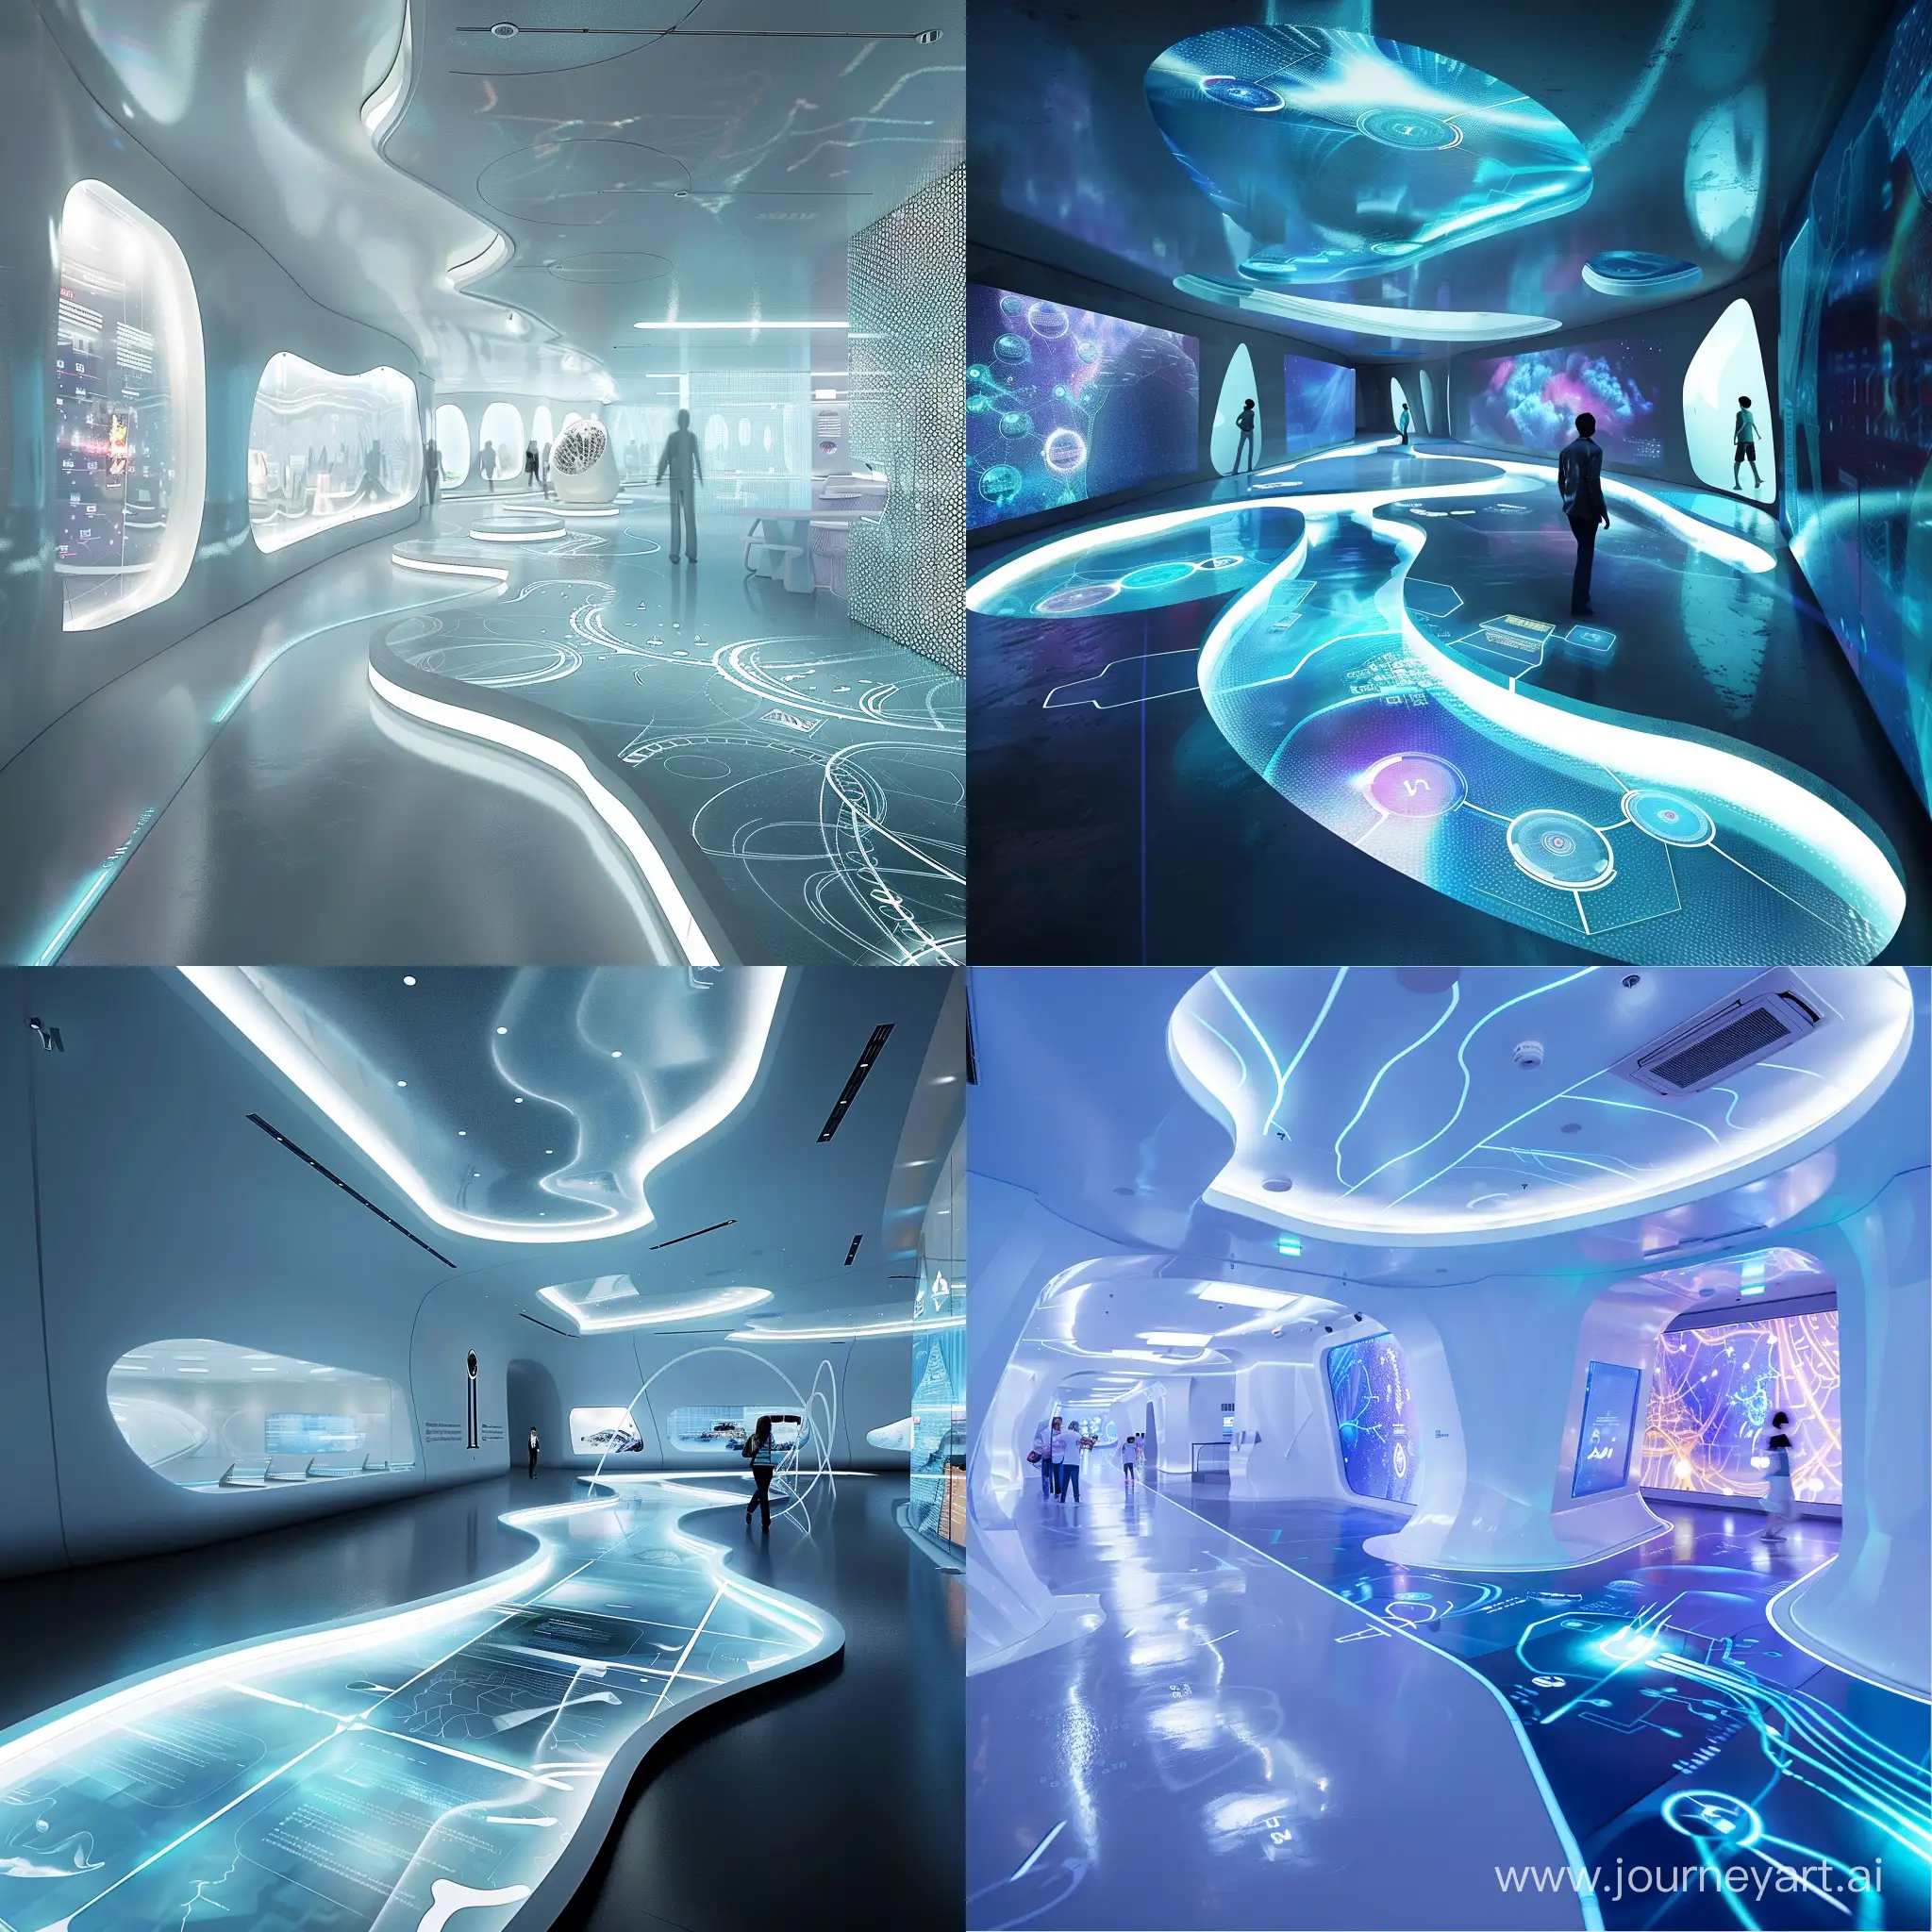 Futuristic museum with interactive floors and walls